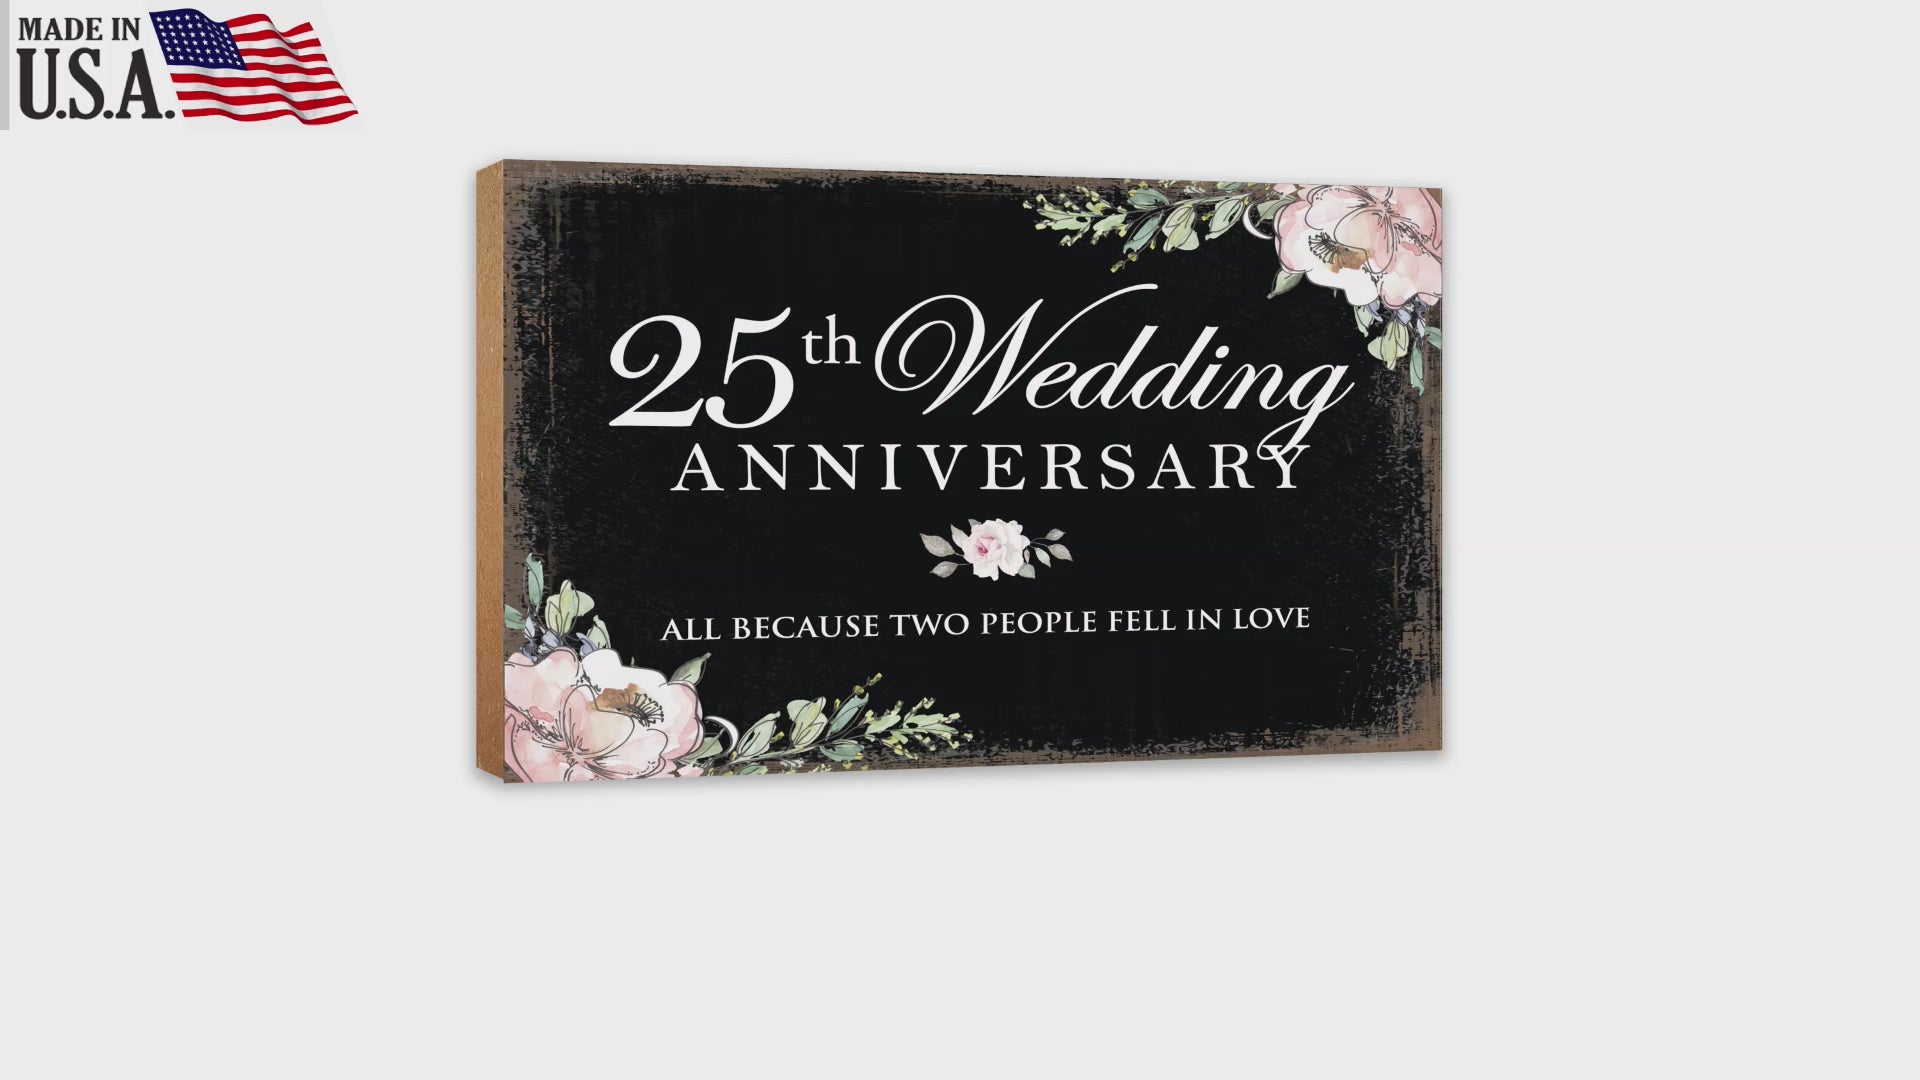 25th Wedding Anniversary Unique Shelf Decor and Tabletop Signs Gifts for Couples - Fell In Love